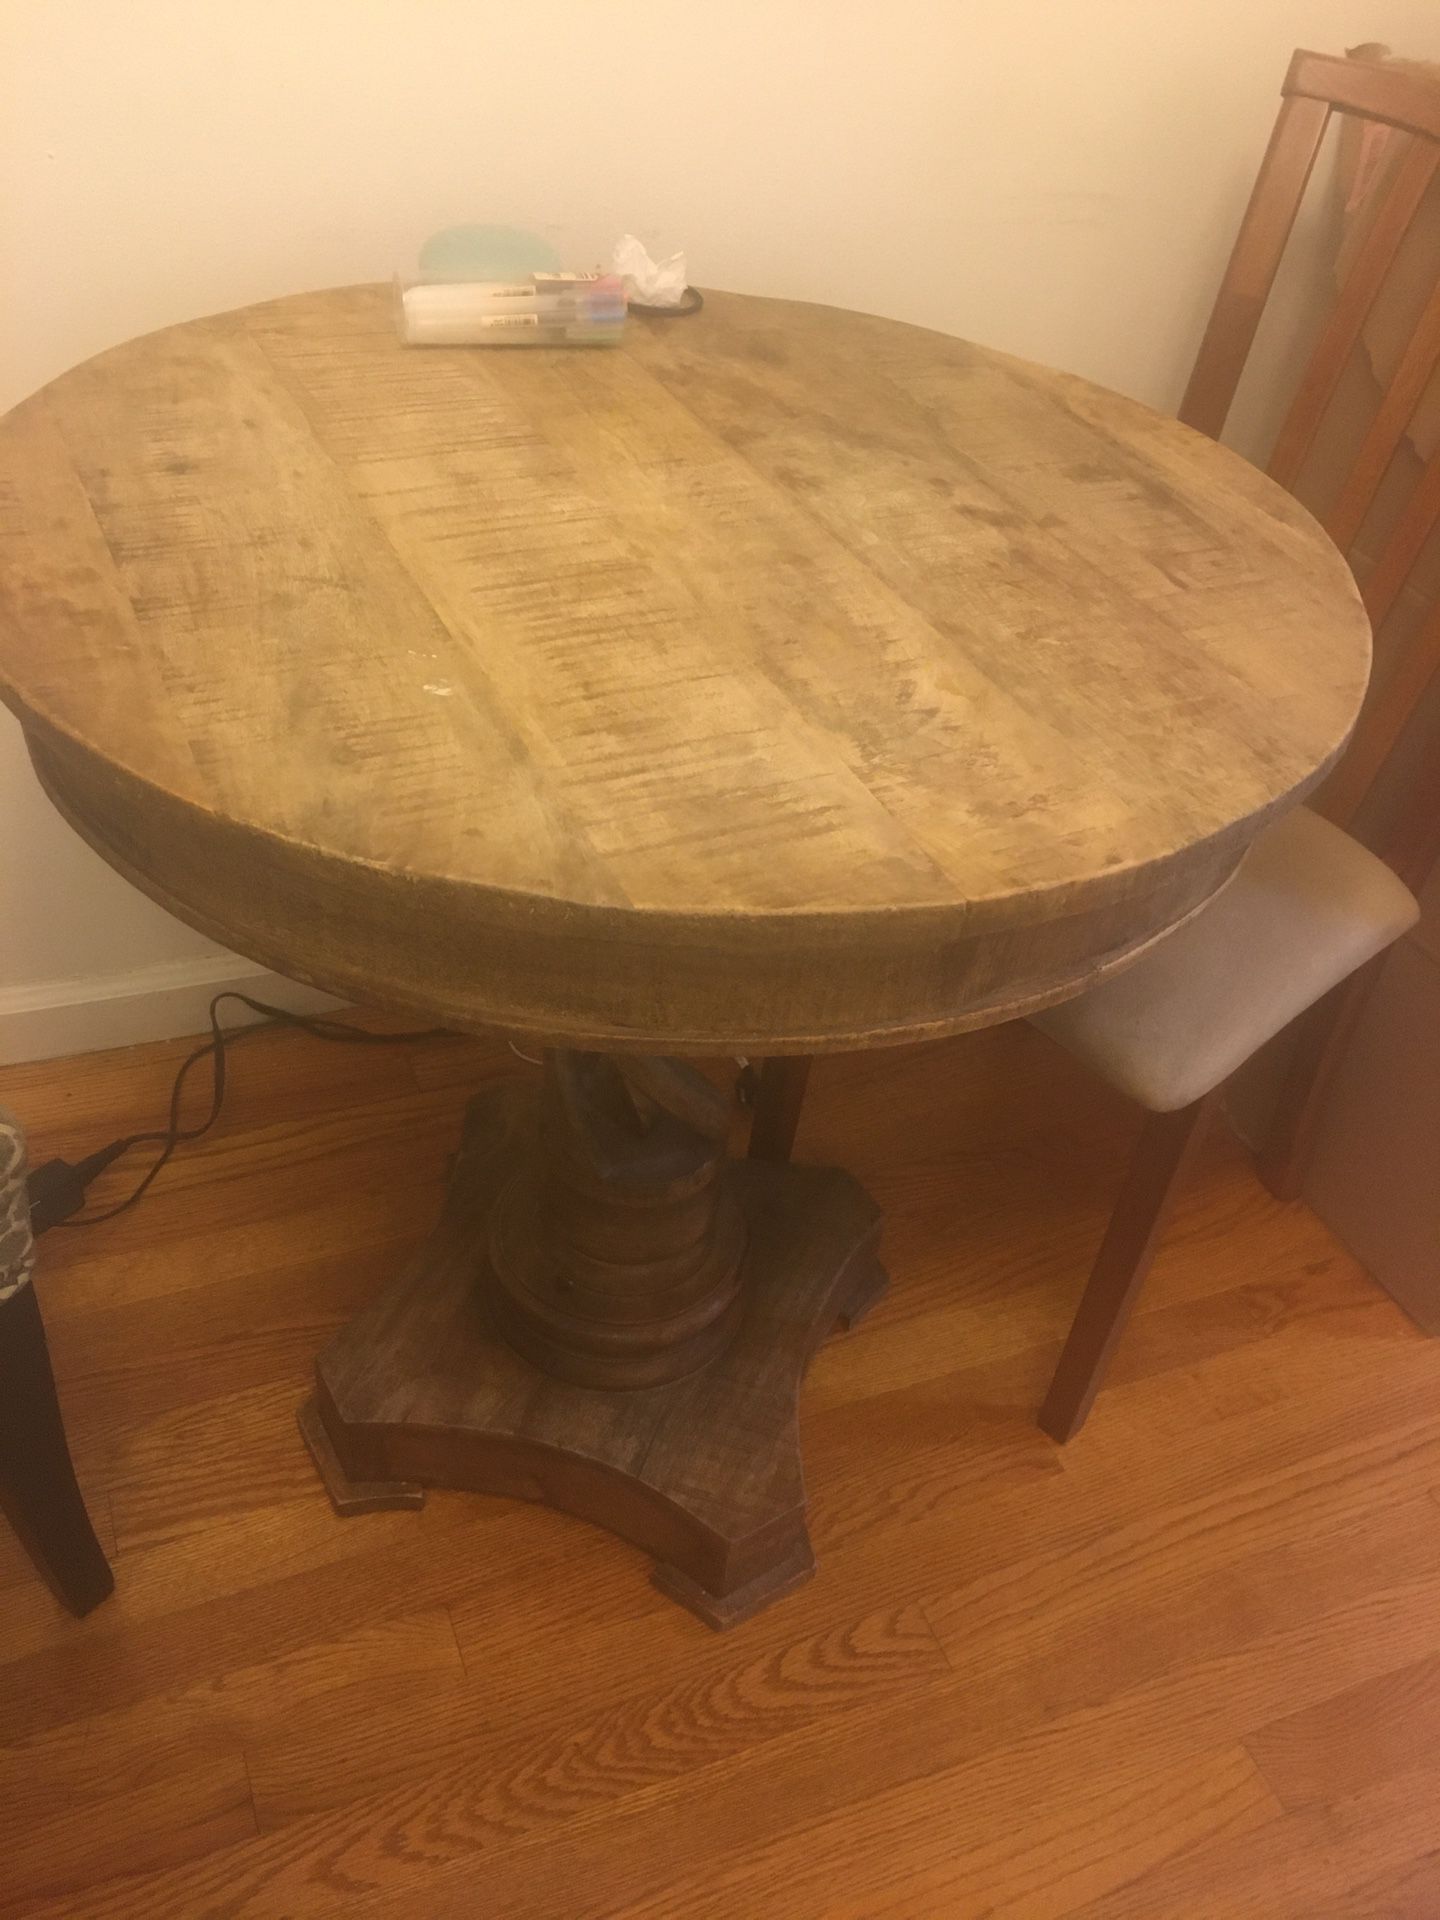 Small wooden dinning table